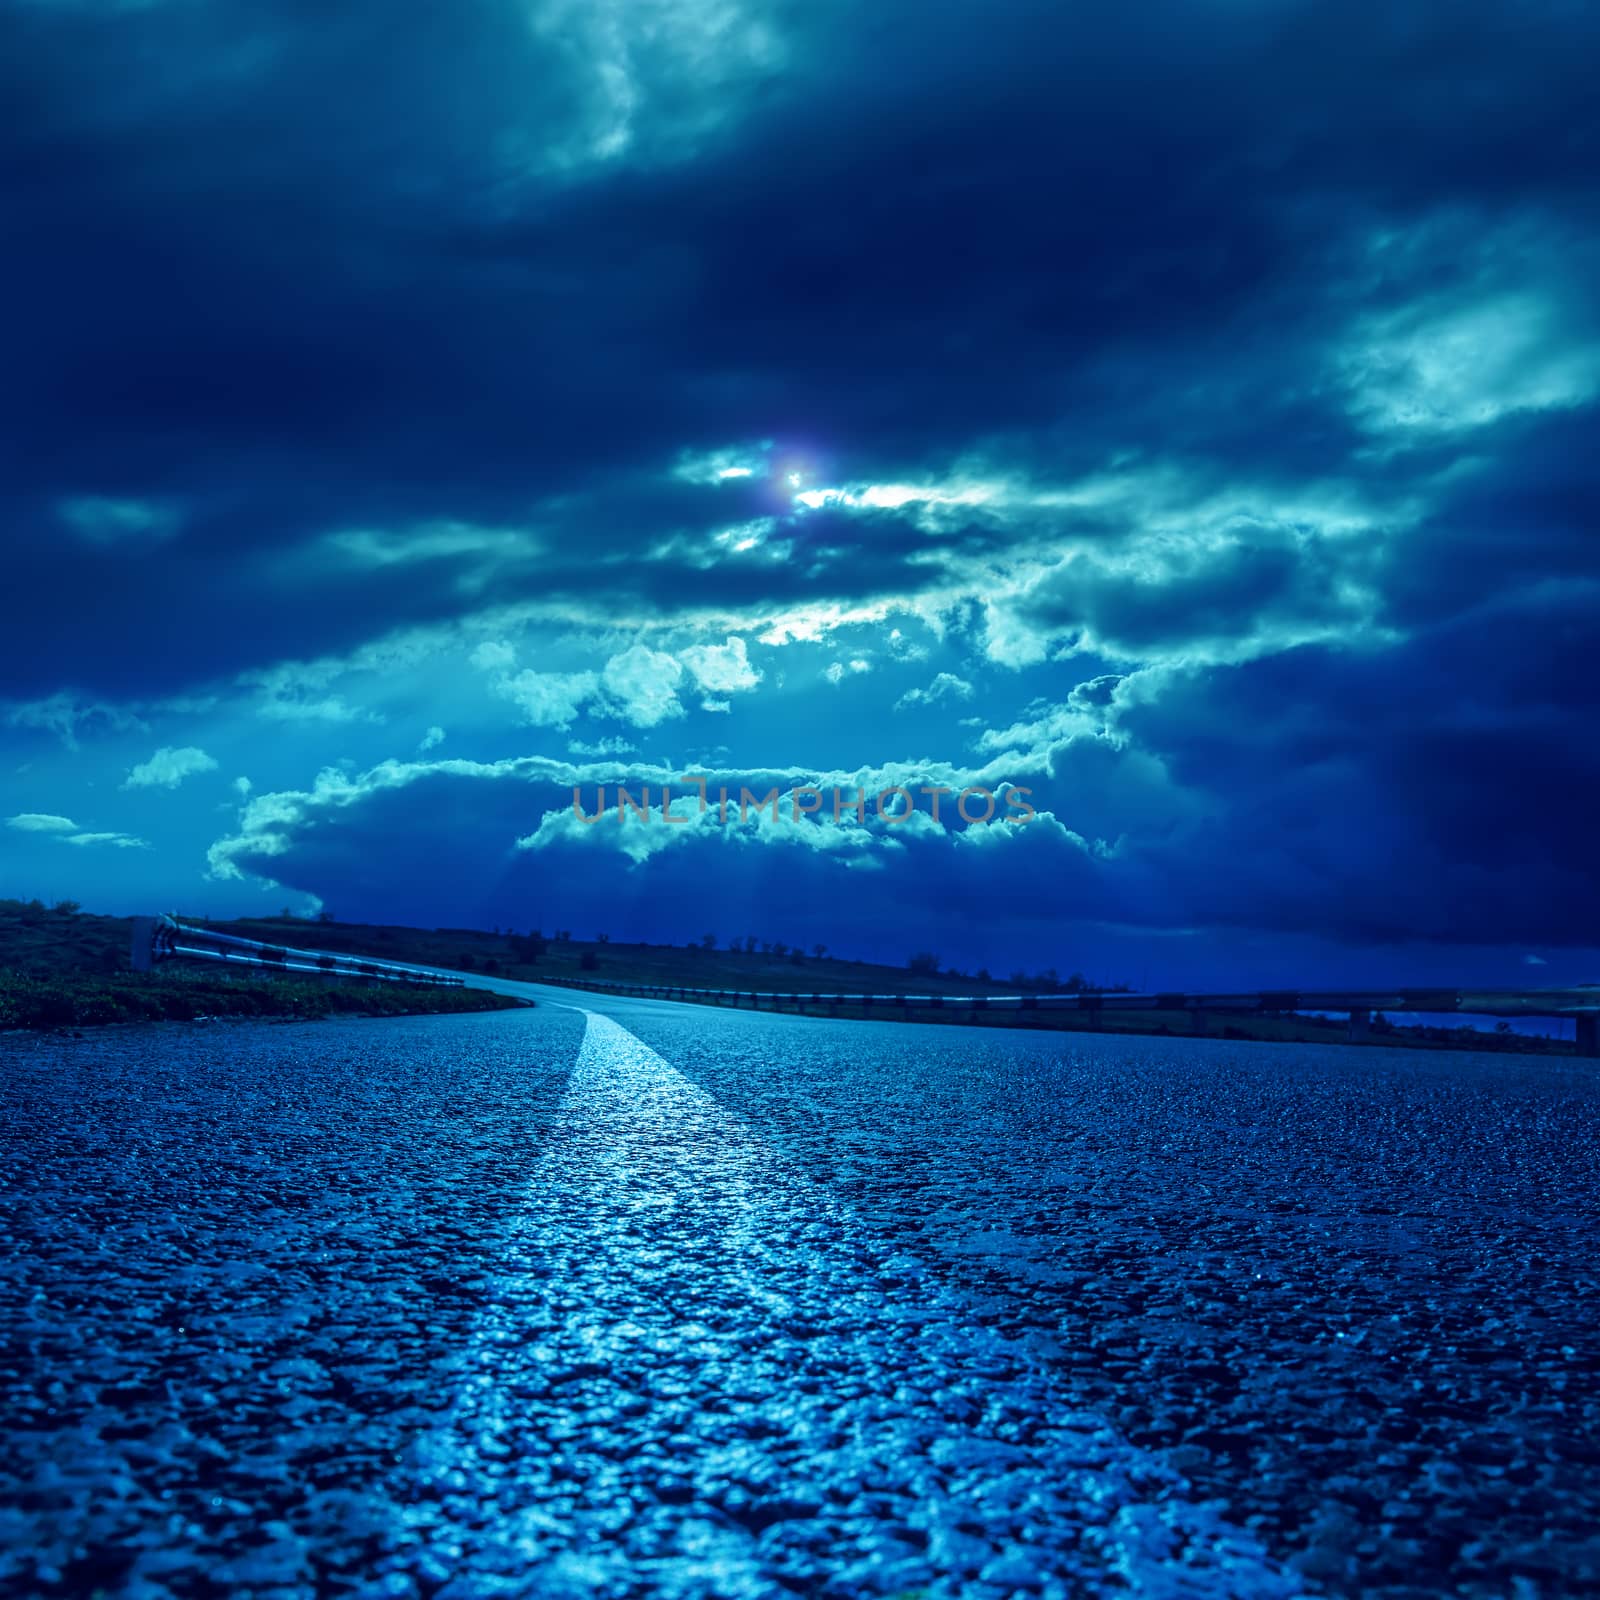 low dramatic clouds over asphalt road in dark blue moonlight by mycola